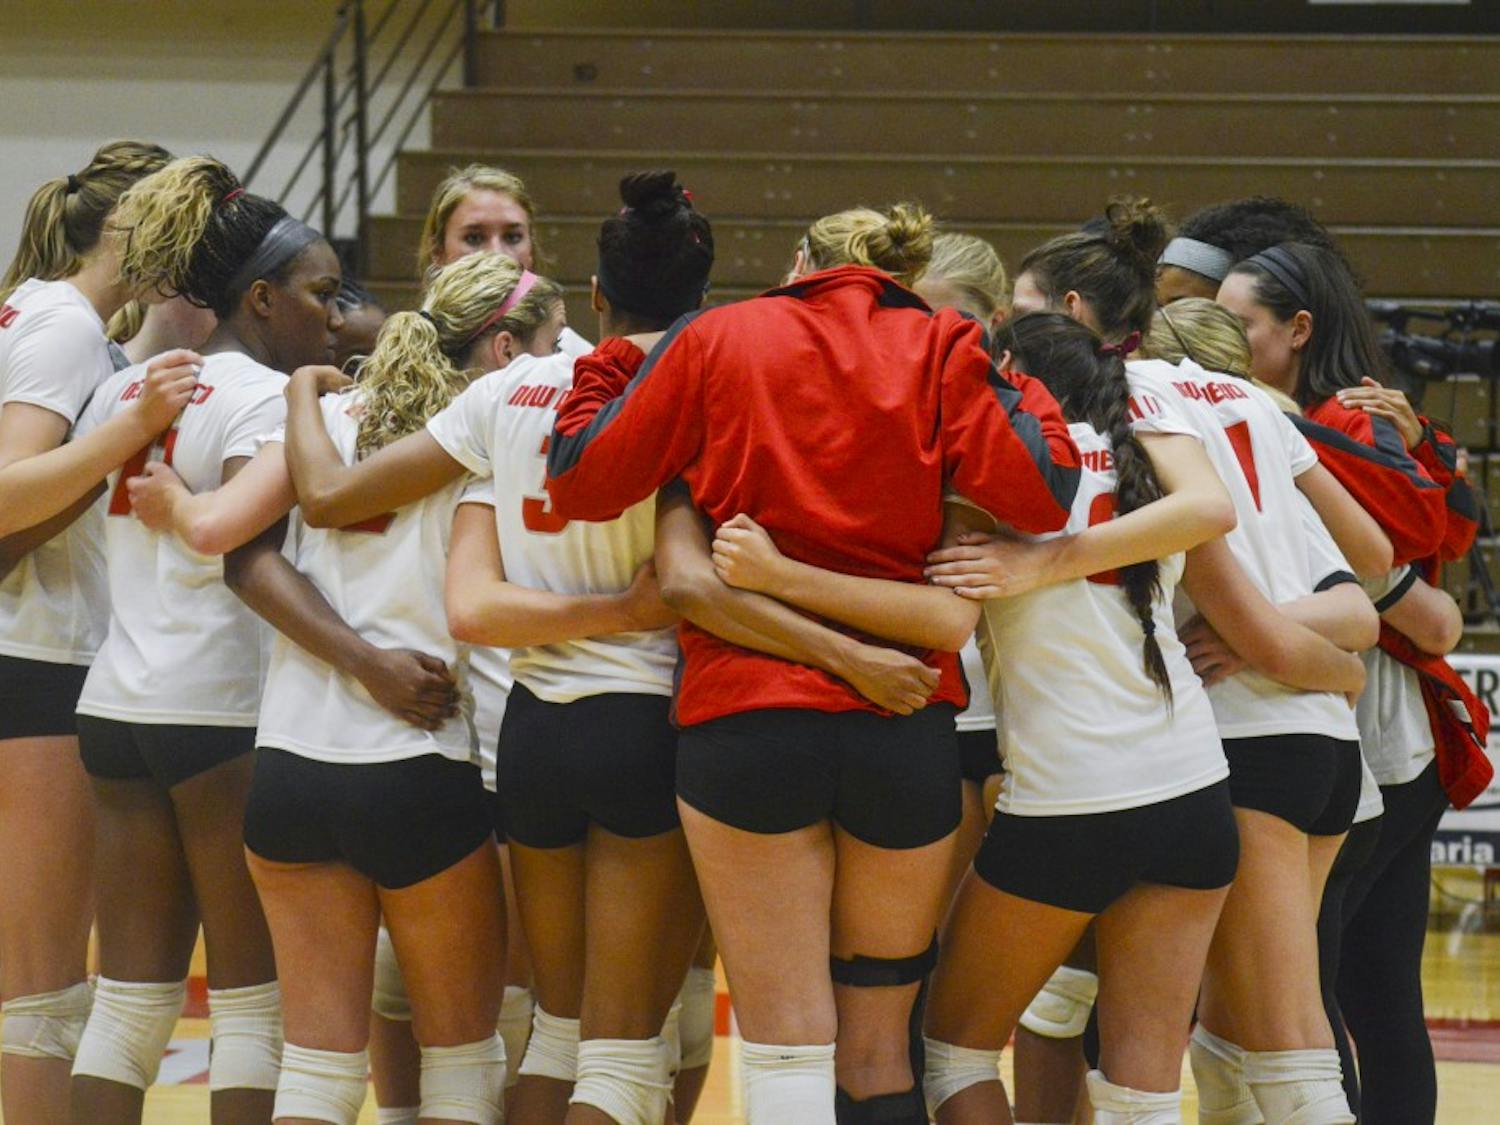 The Lobo Volleyball team huddles together after its game against Colorado State at Johnson Gym on Thursday night. The Lobos lost to Colorado State 0-3.